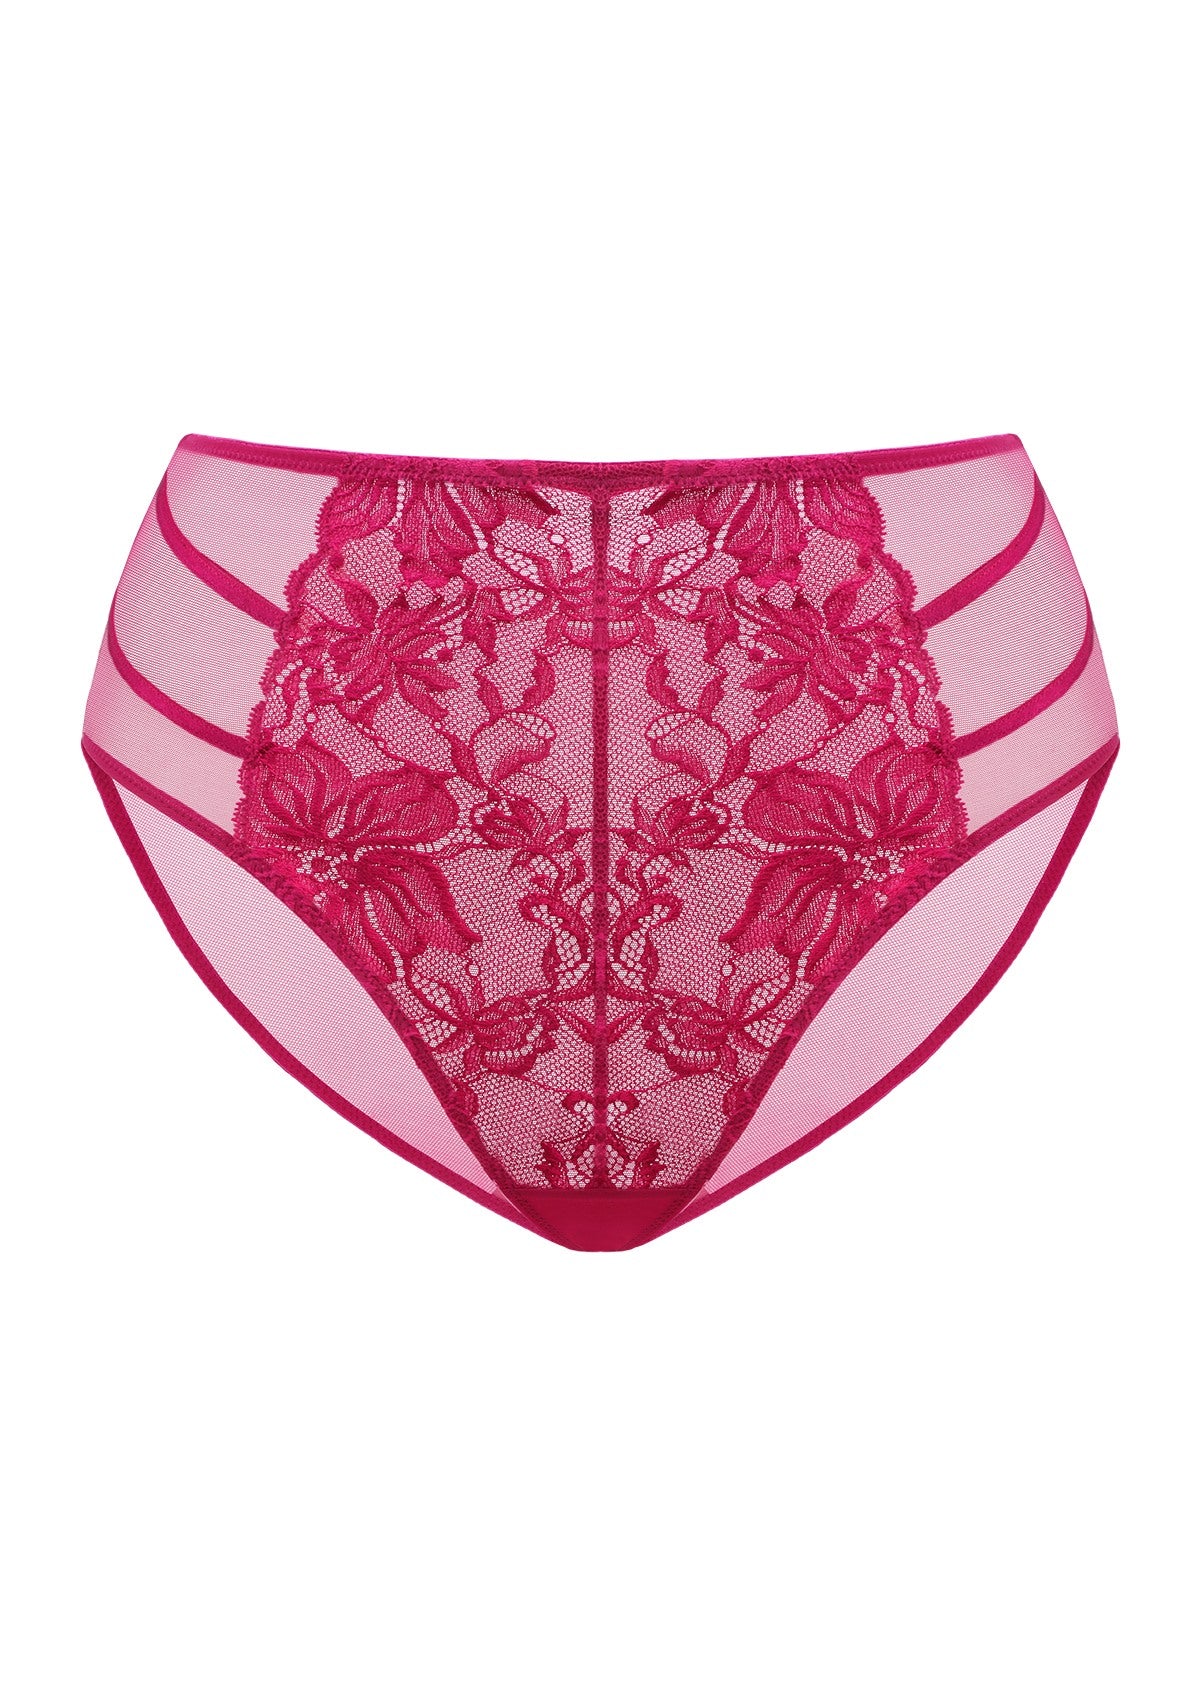 HSIA Pretty In Petals Mid-Rise Sexy Lace Everyday Underwear  - M / High-Rise Brief / Red